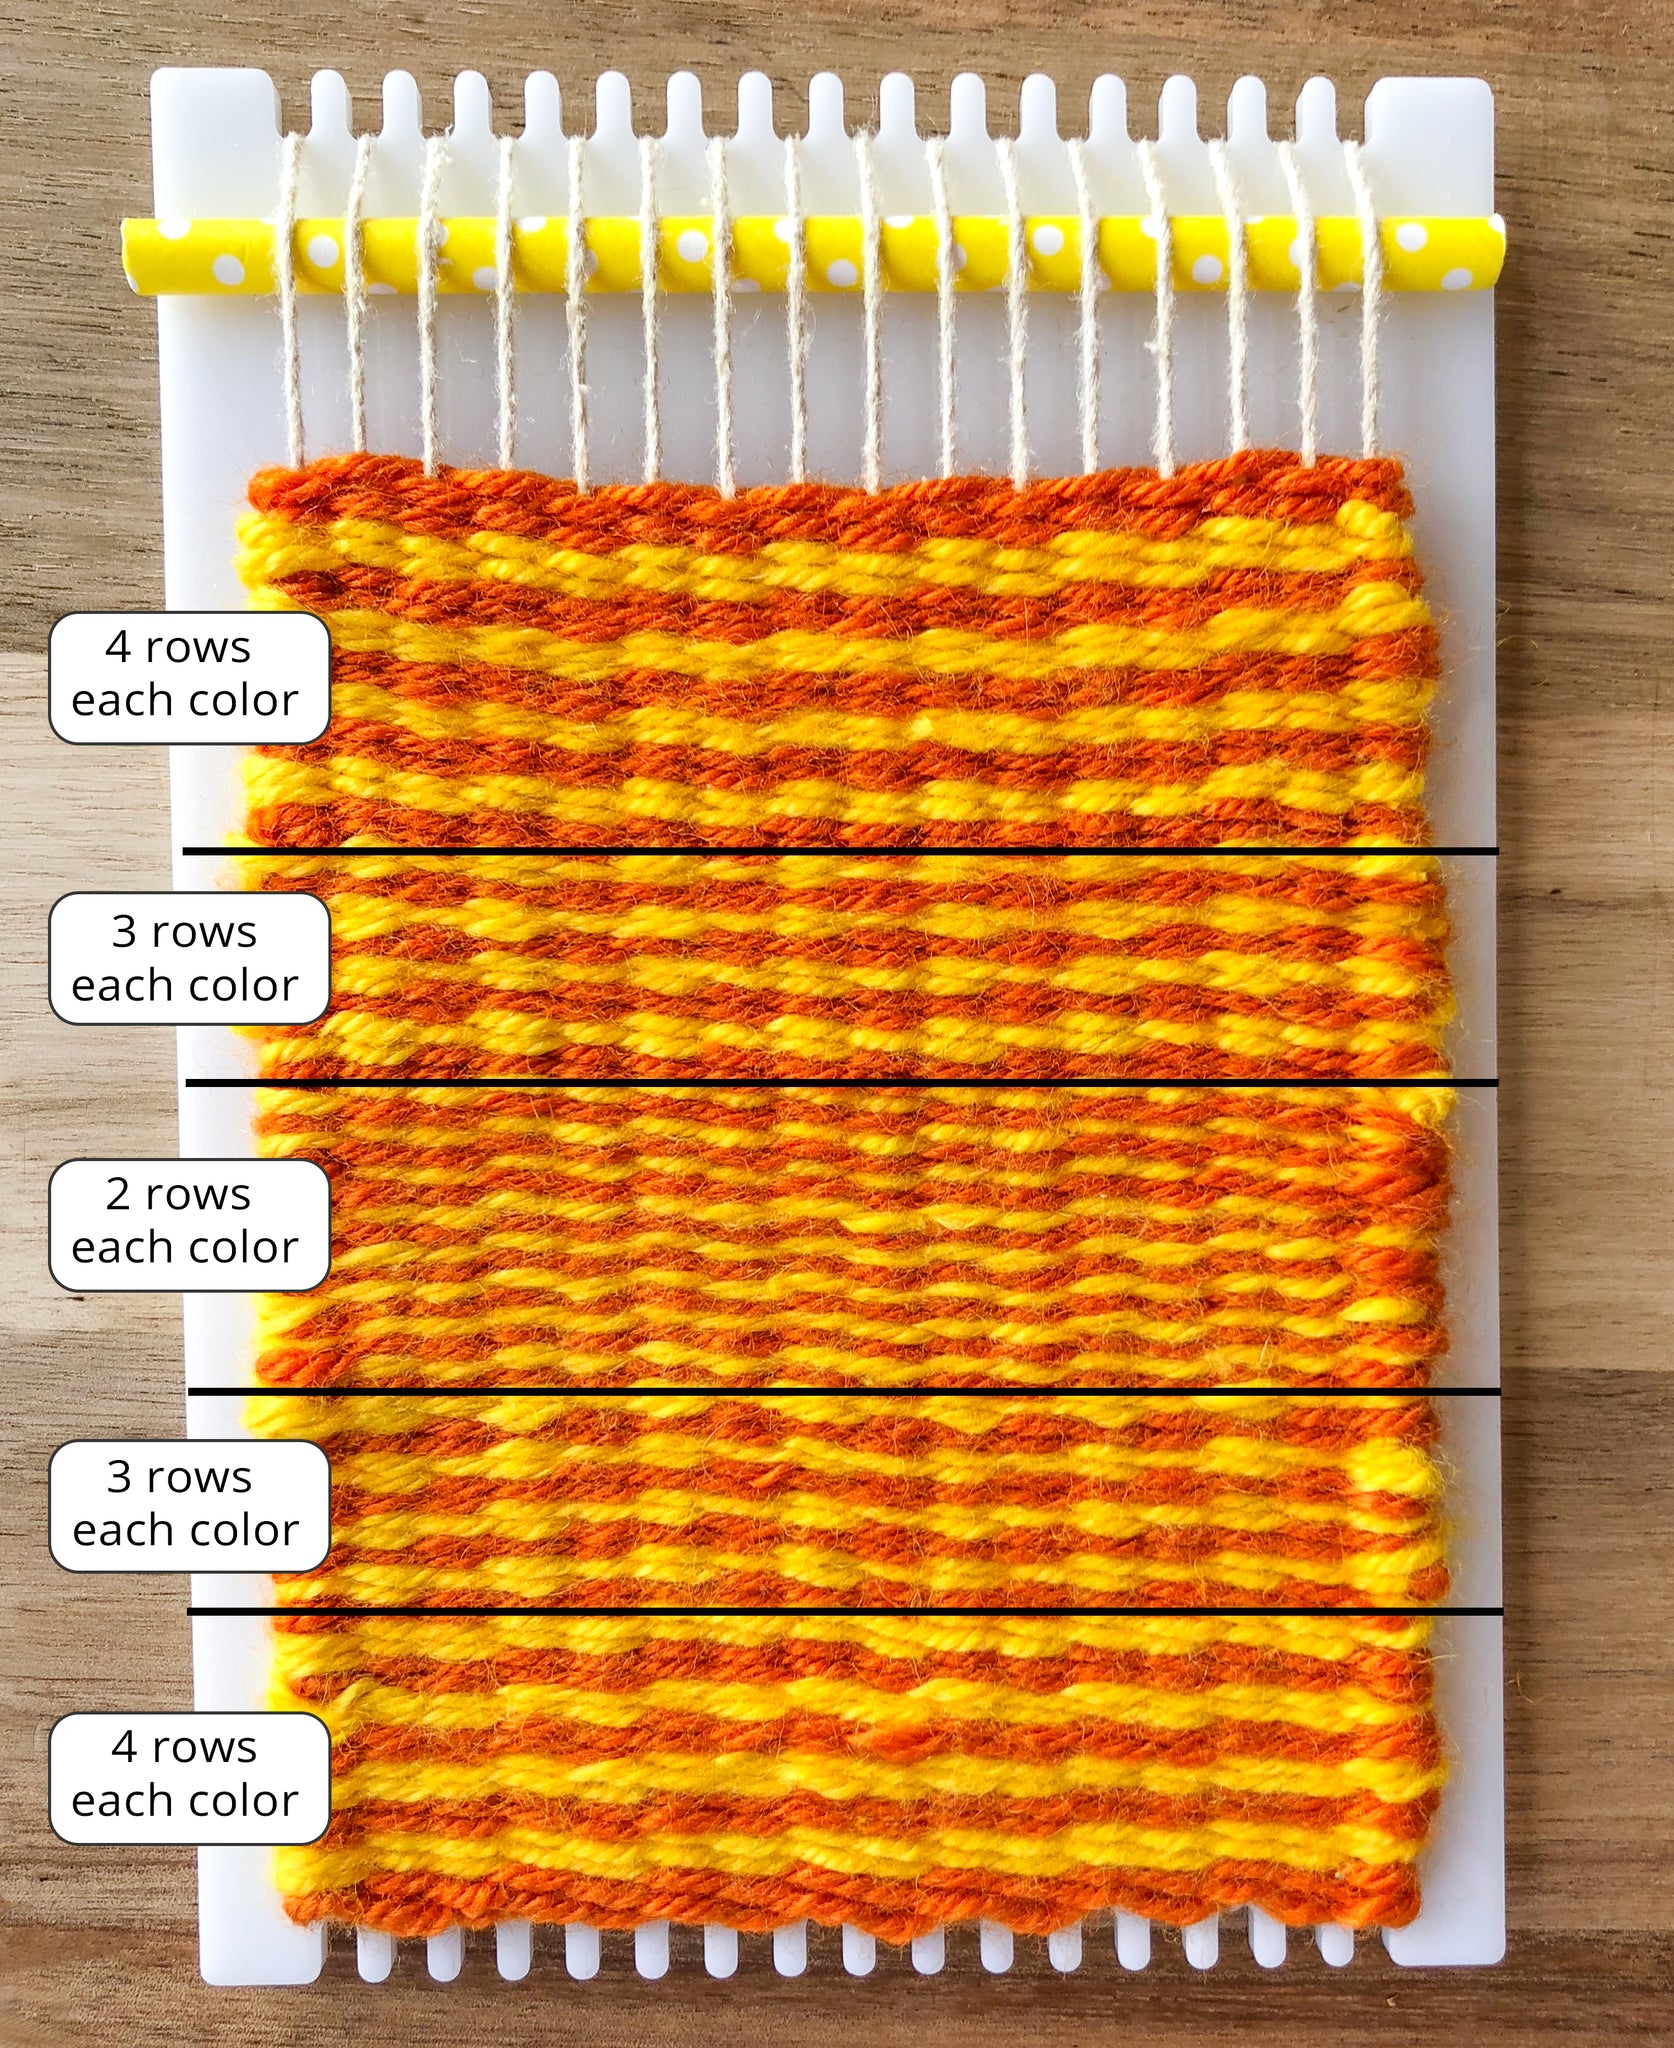 weaving stripes of different thickness